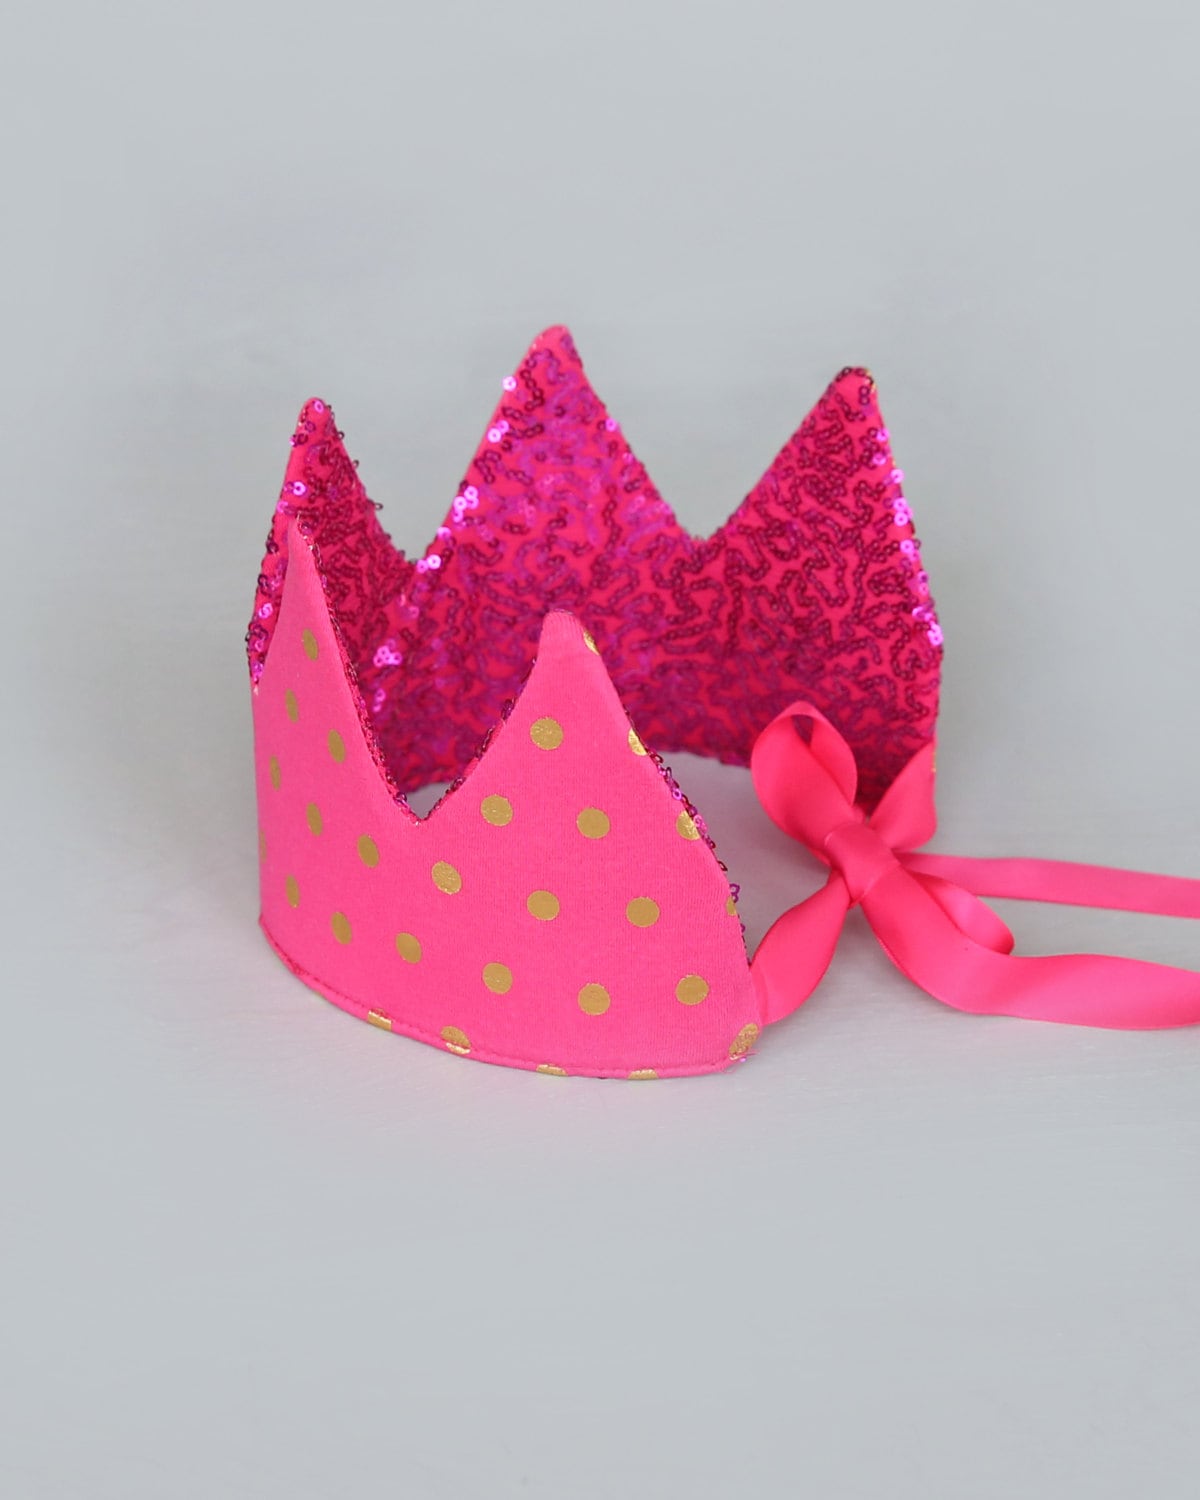 Dress Up Crown - Sequin Crown - Birthday Crown - Hot Pink with Gold Dots Crown Reverse Hot Pink Sequins - Fits all